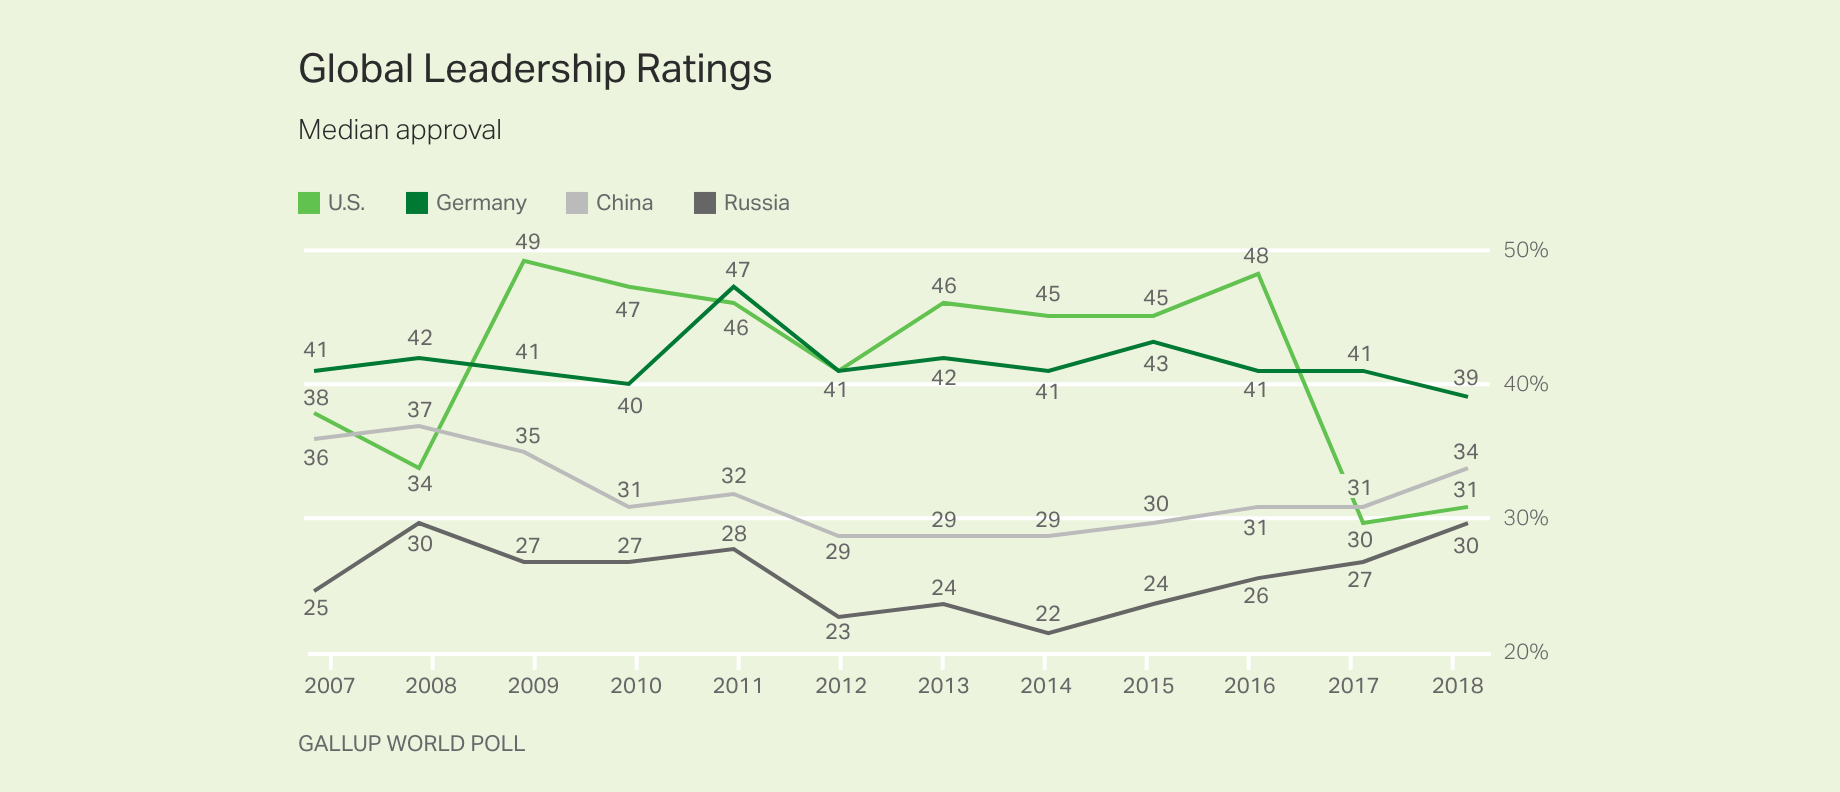 Line graph. Trend in approval ratings for the U.S., Germany, Russia and China.